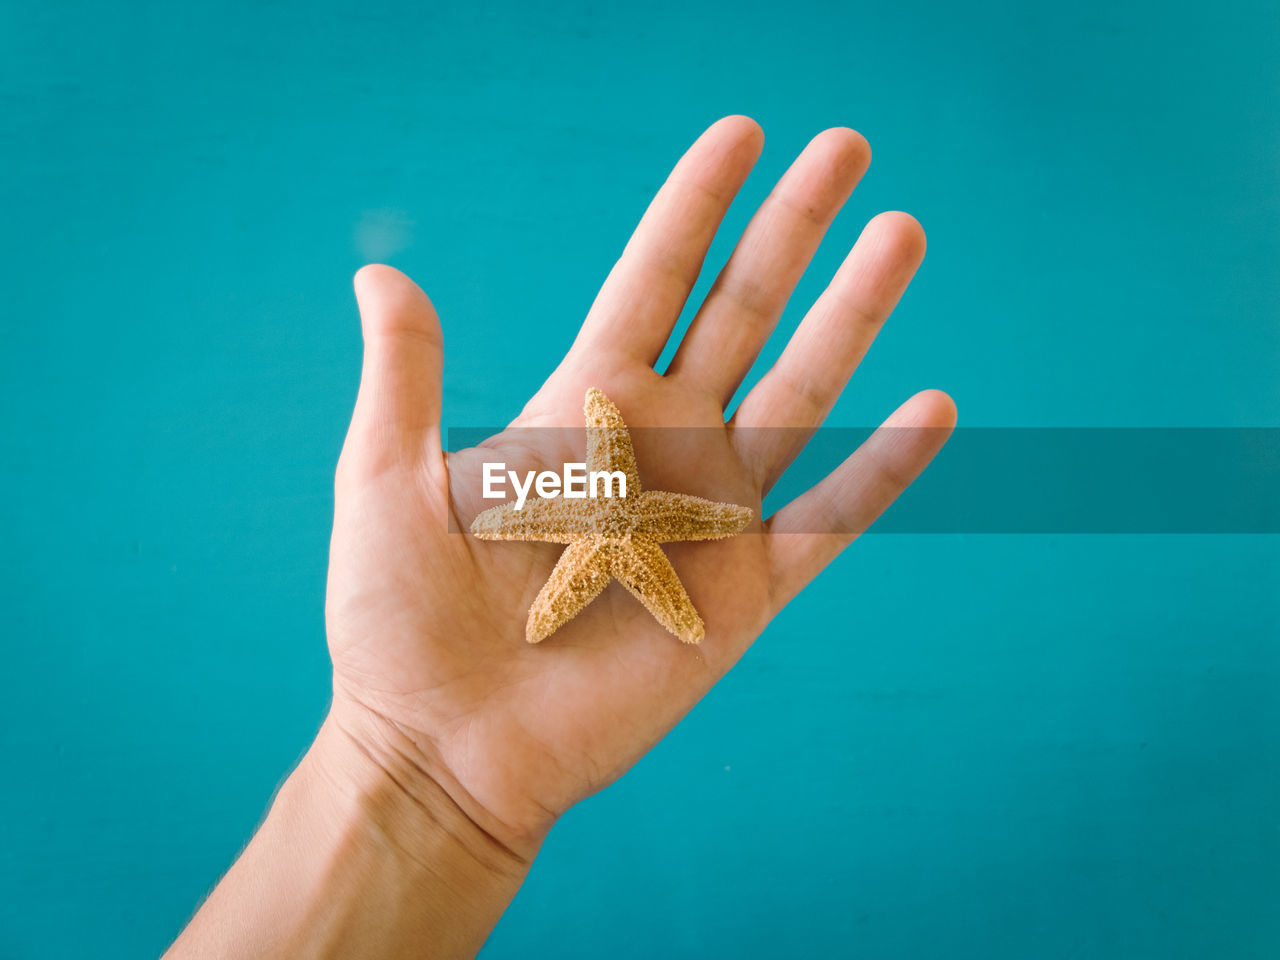 Cropped image of hand with starfish against turquoise wall